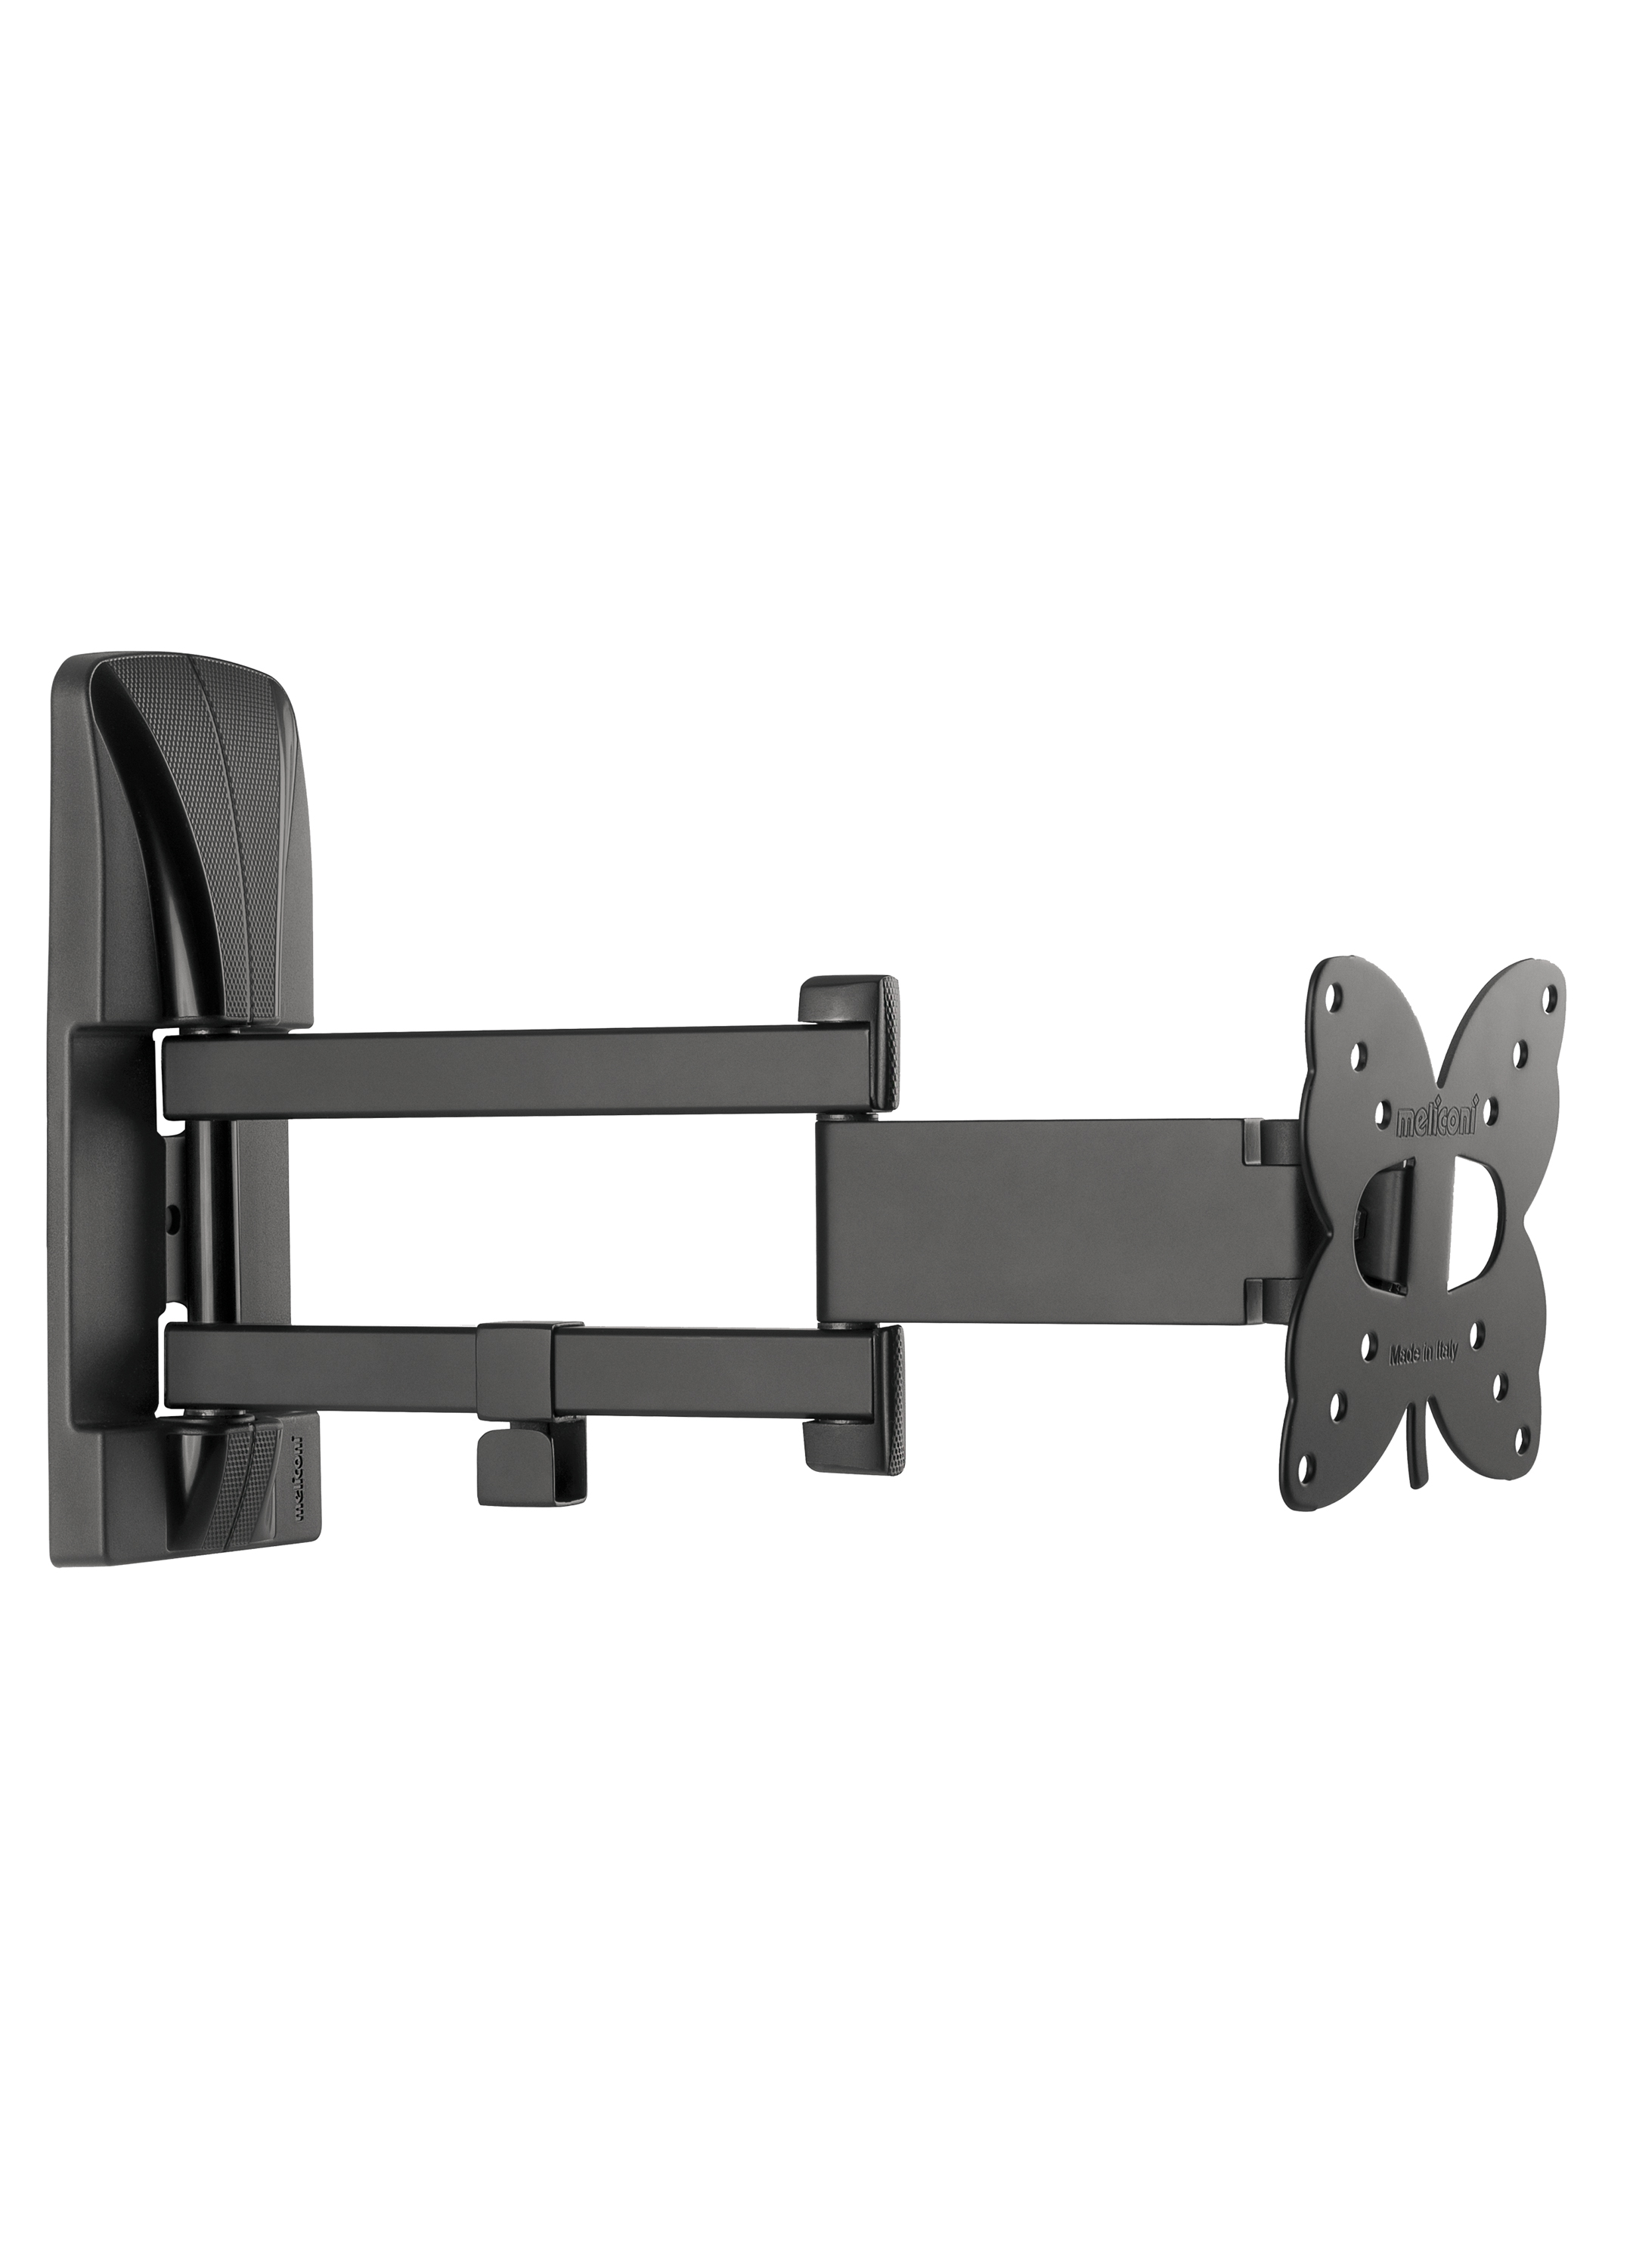 Slimstyle 100 SDR, wall bracket rotatable double arm for tv up to 25 inch, black